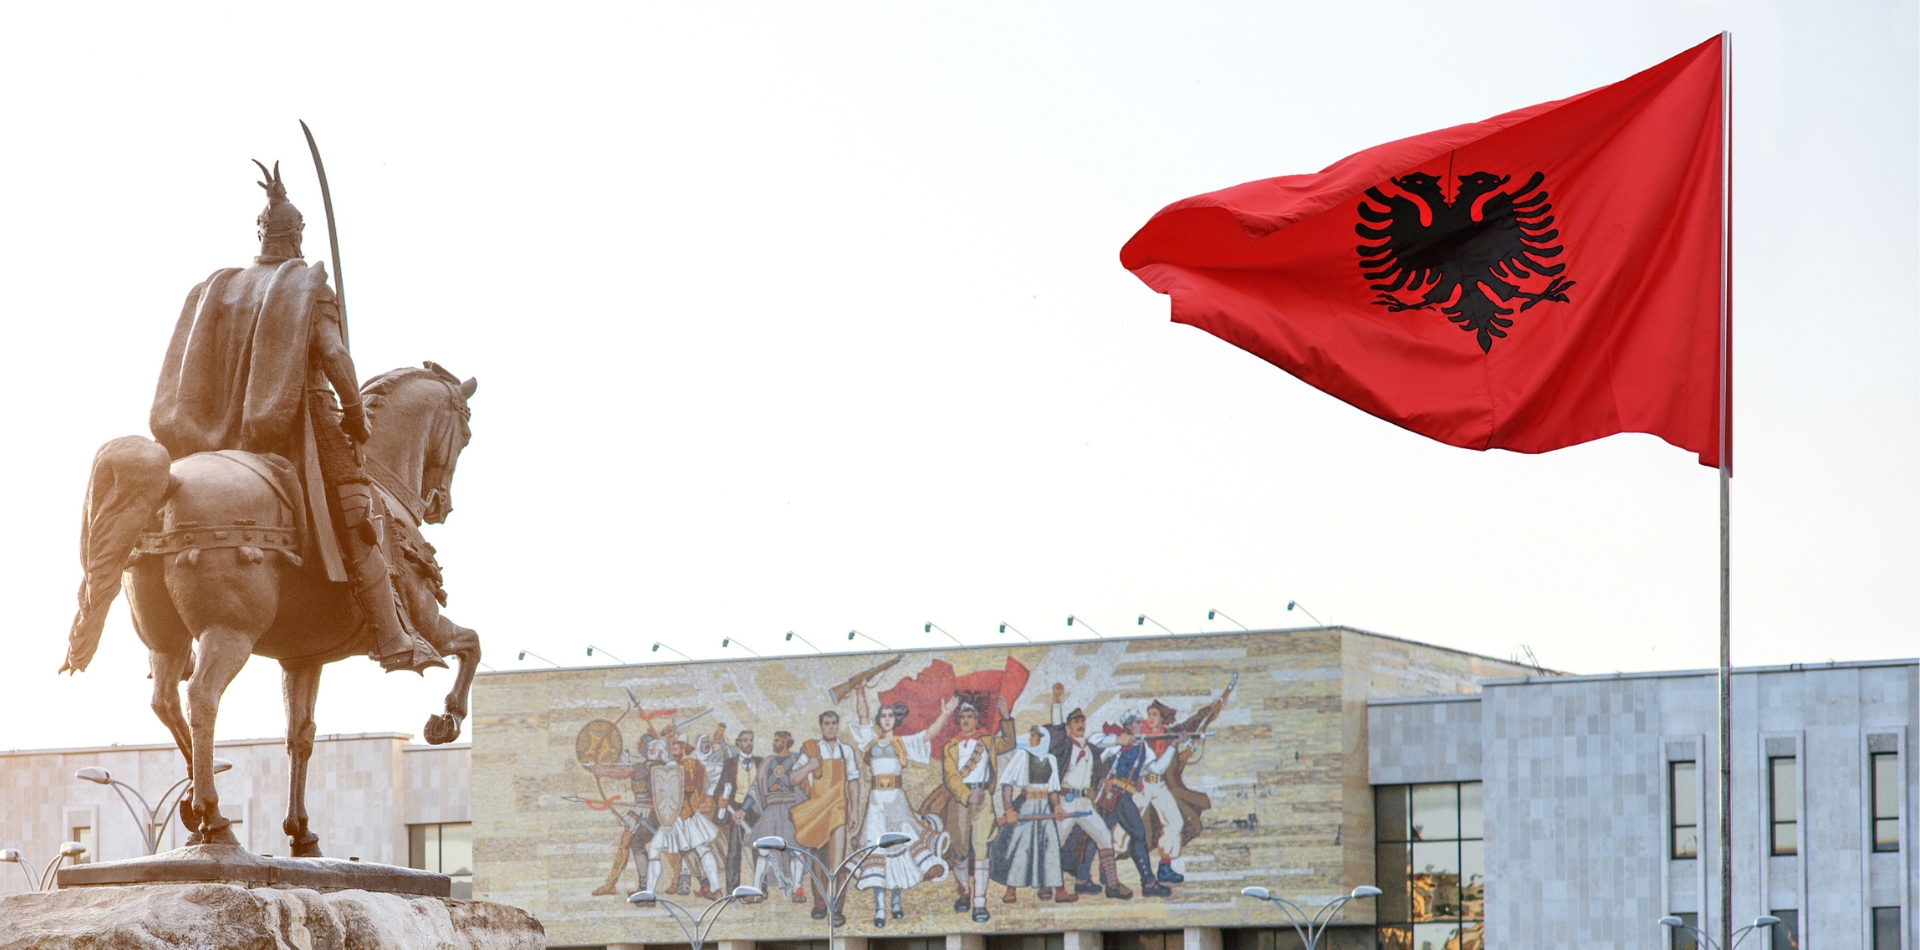 Albania Officially Green Lights Medical and Industrial Cannabis Cultivation